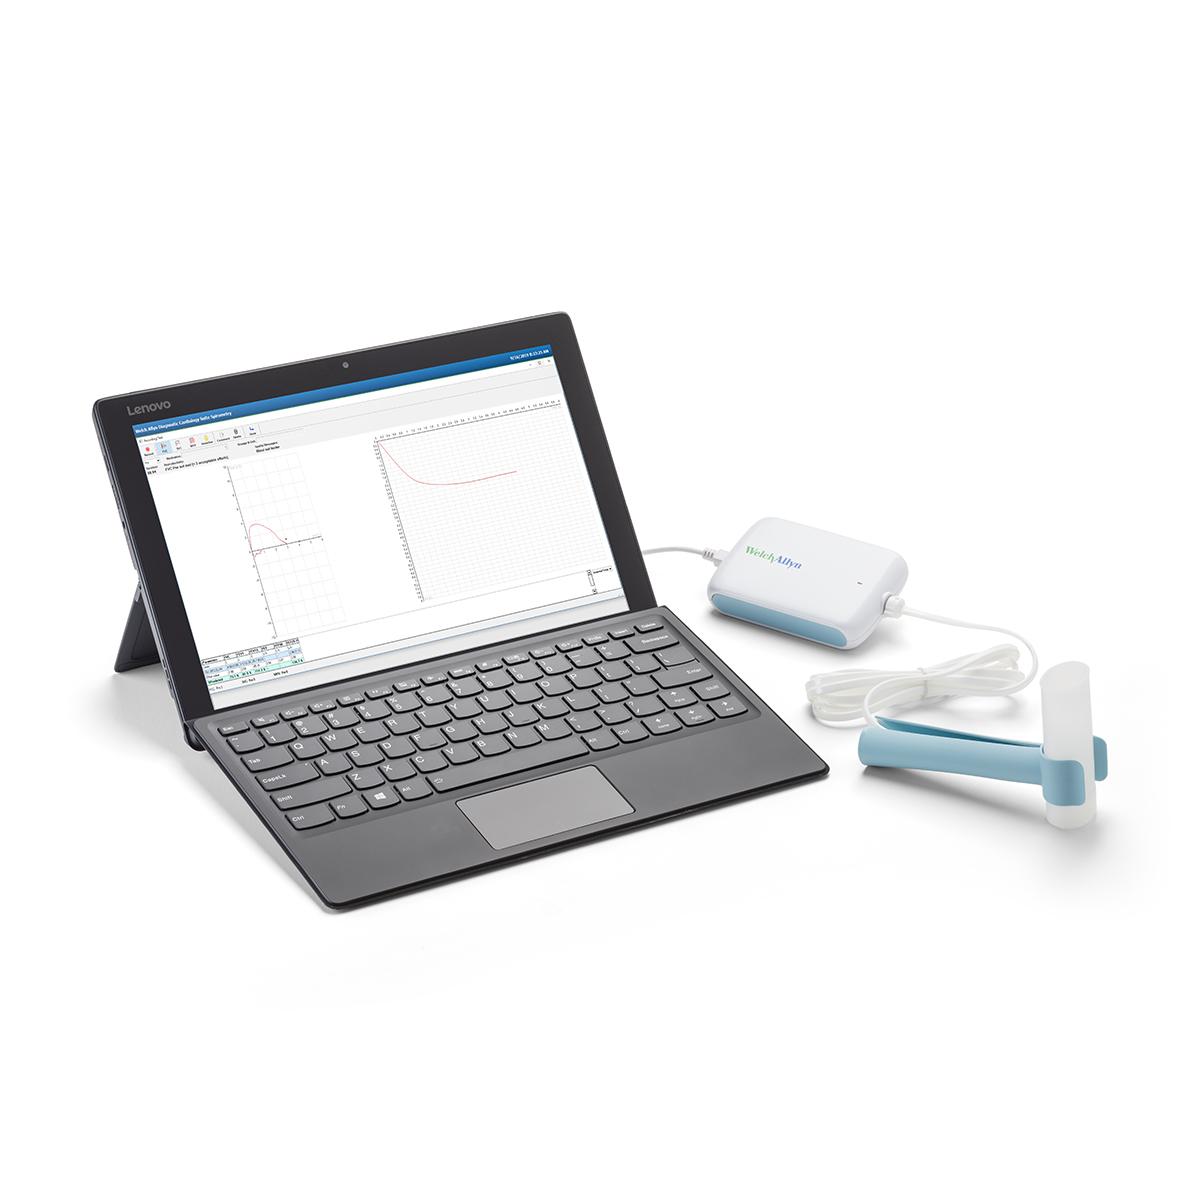 A spirometer is connected to a computer running Welch Allyn Diagnostic Cardiology Suite software, displaying a flow curve.